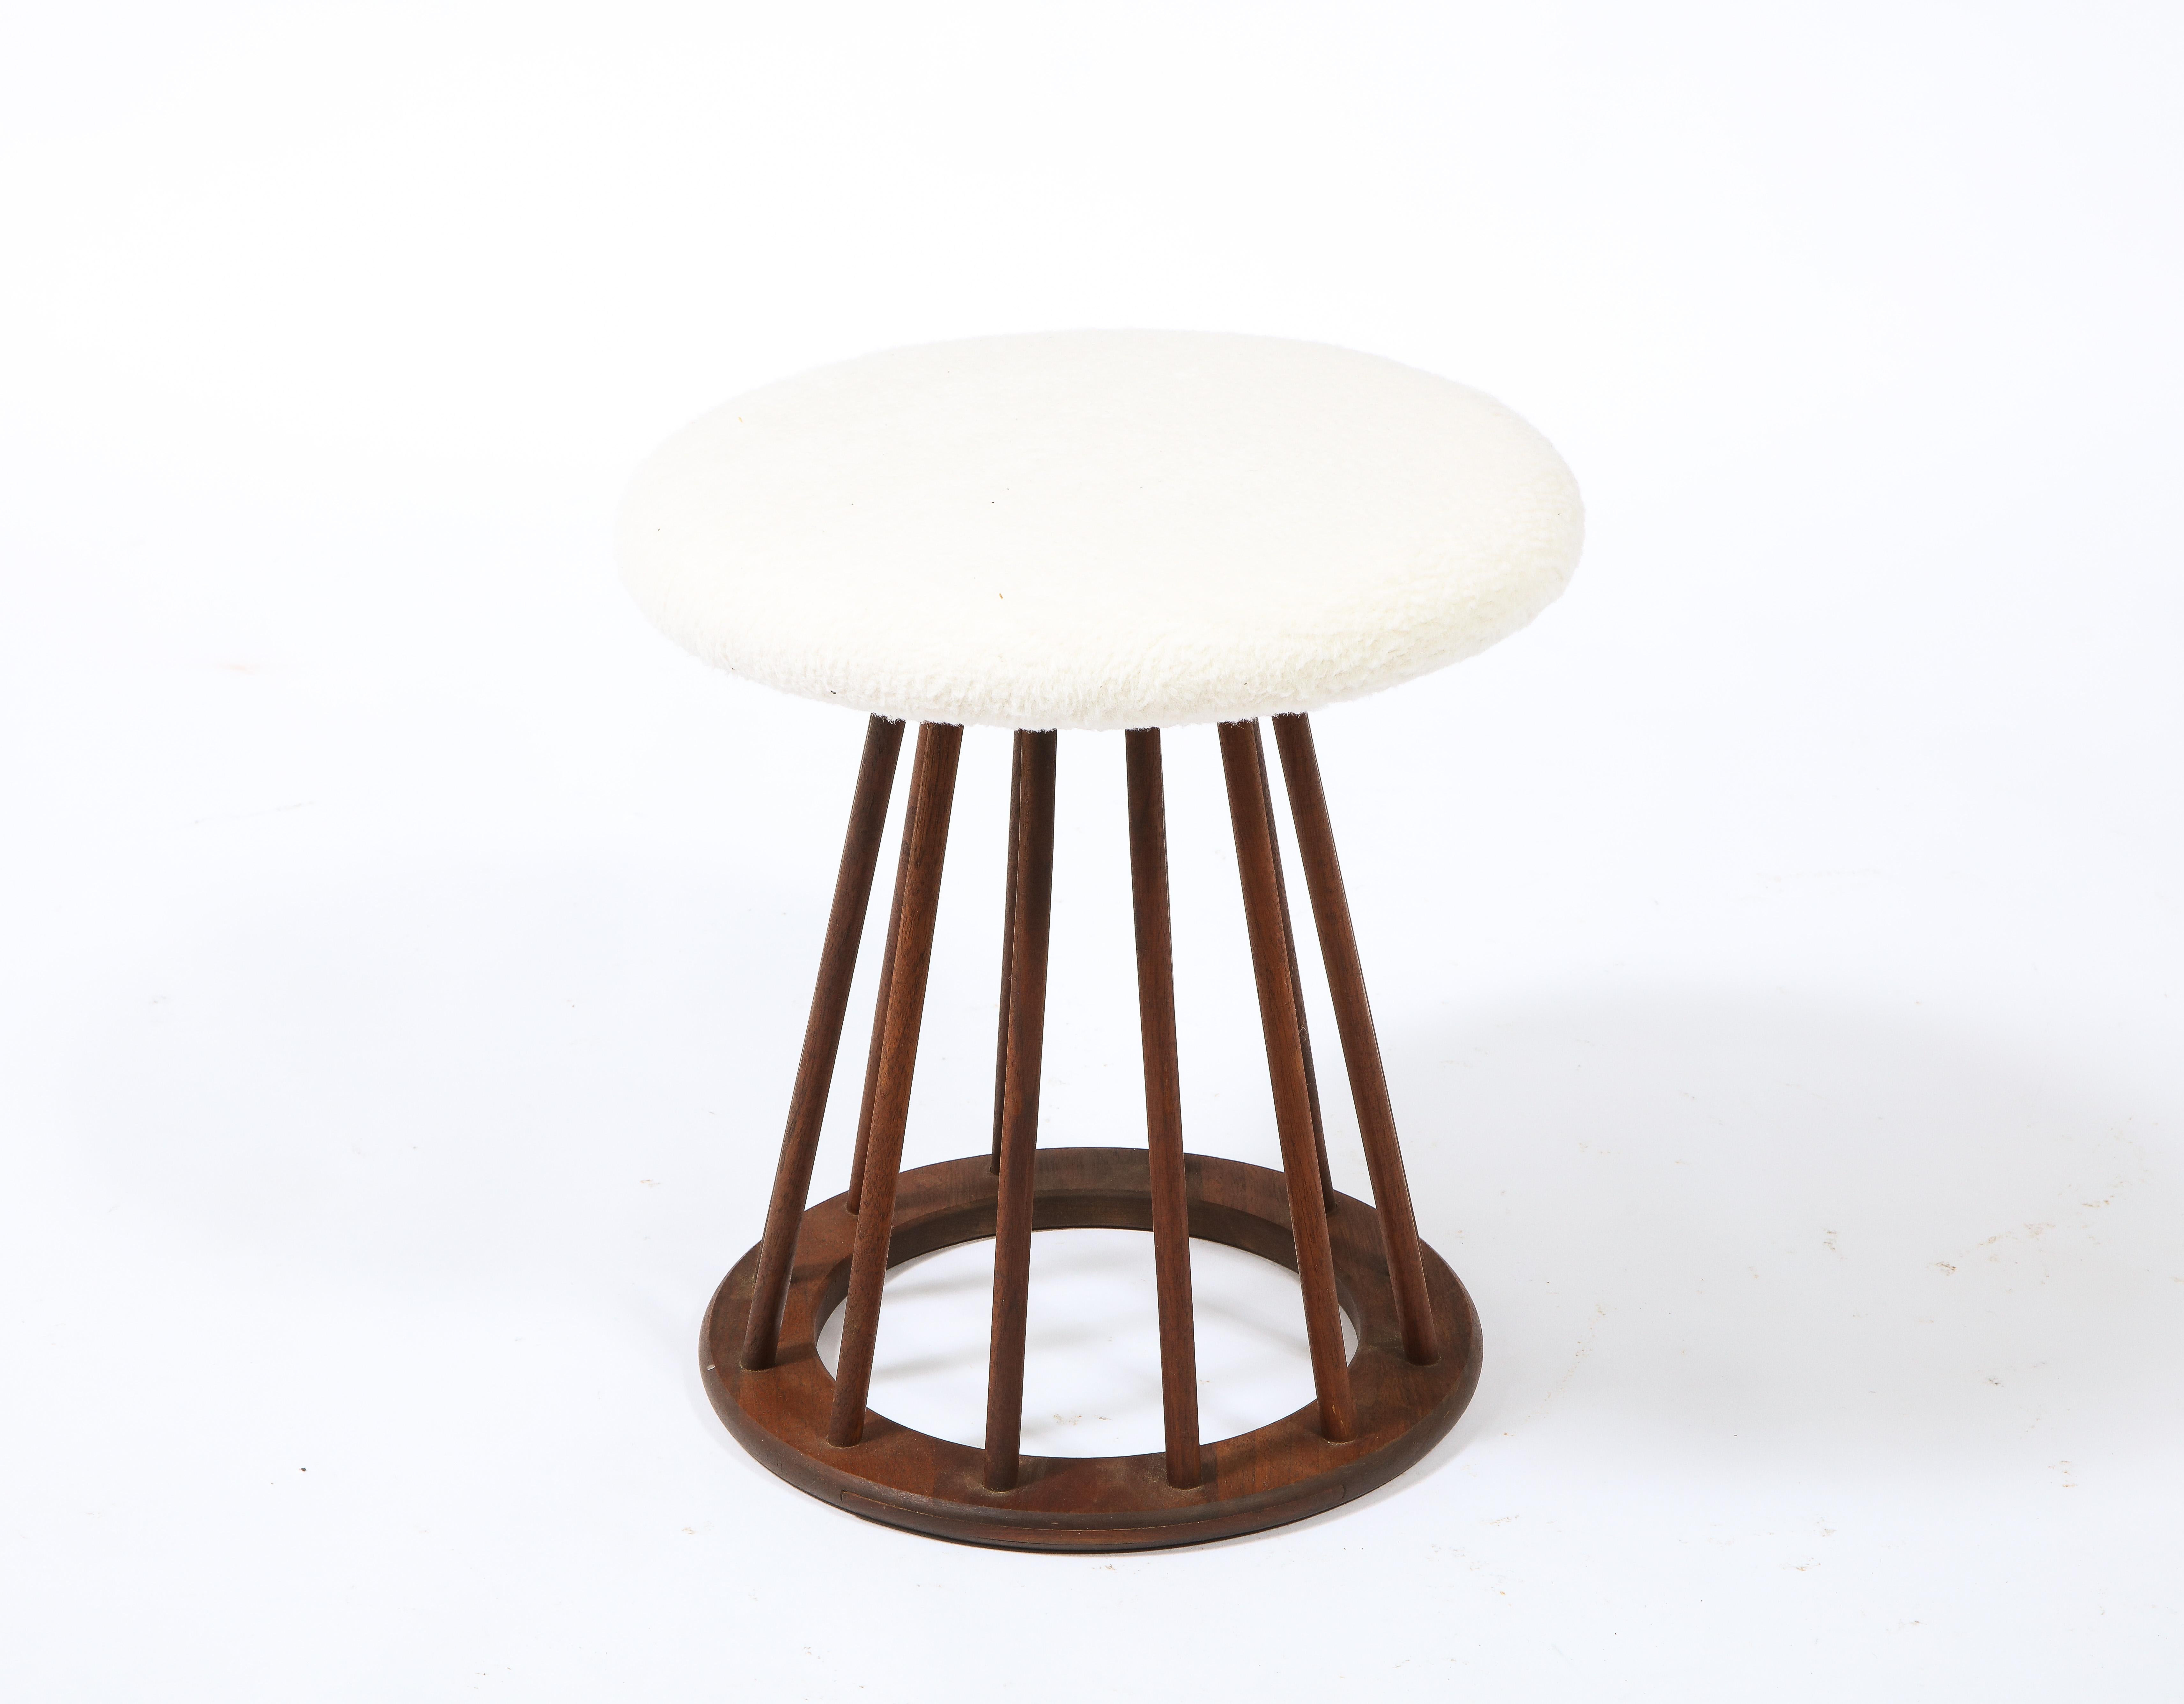 A set of spindle stools by Arthur Umanoff in walnut, upholstered in wool. Priced by the pair. Two pairs available. 